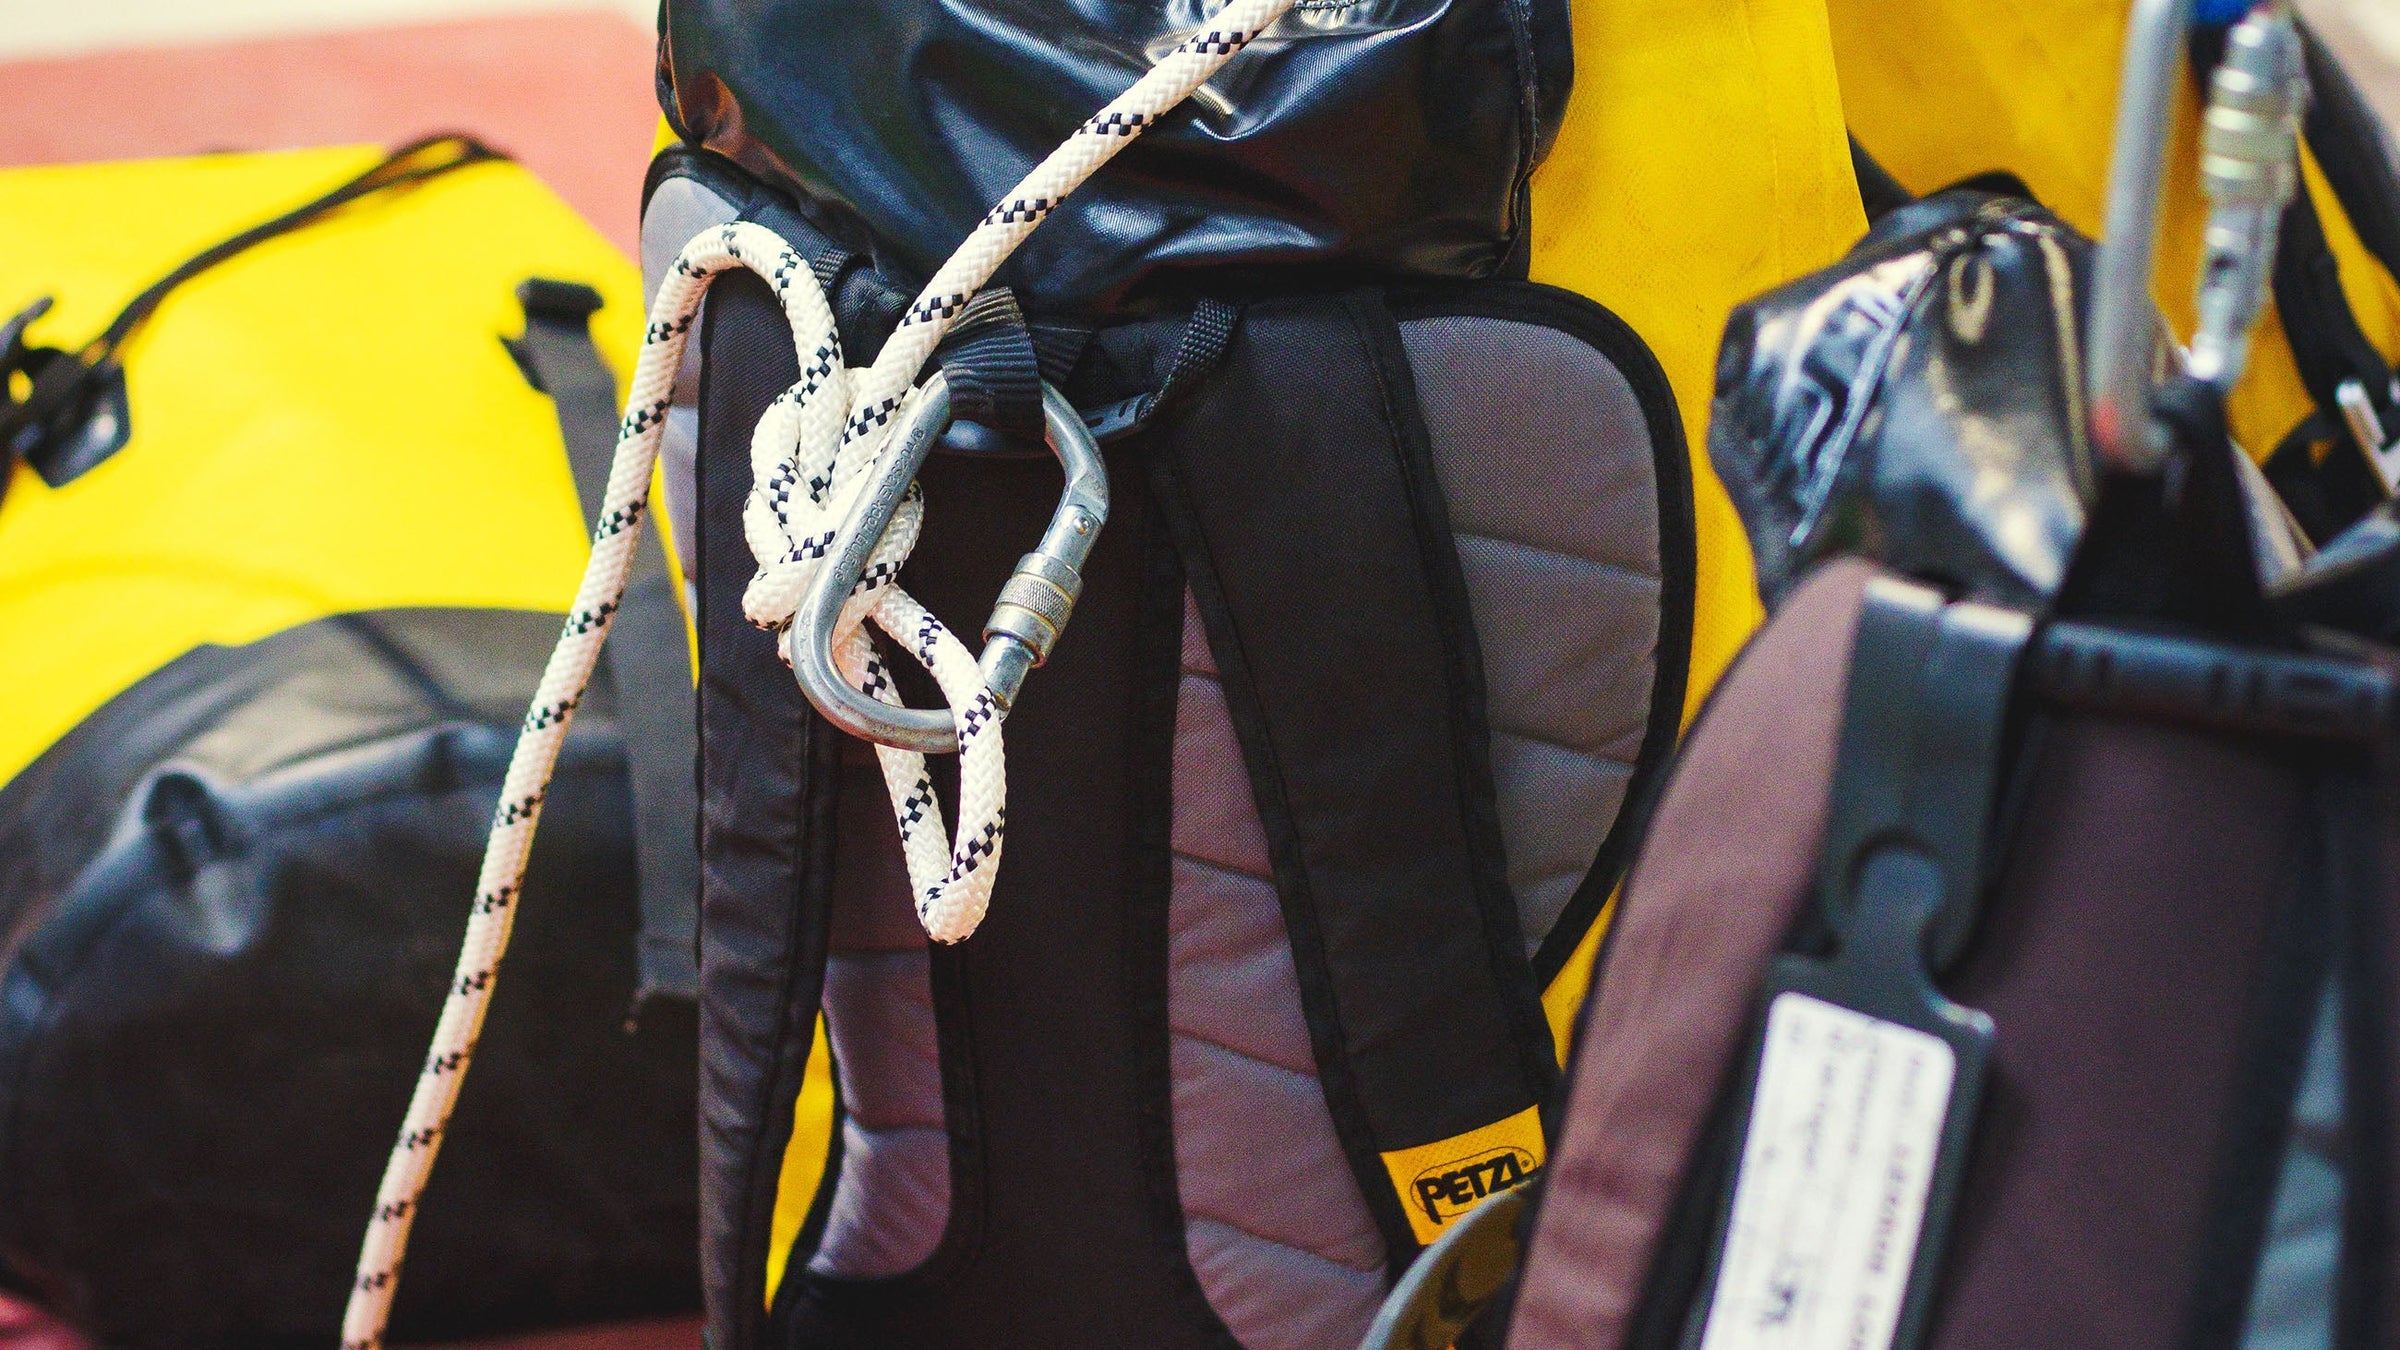 Shop Rope Bags & Accessories  Climb On Equipment PRO Canada